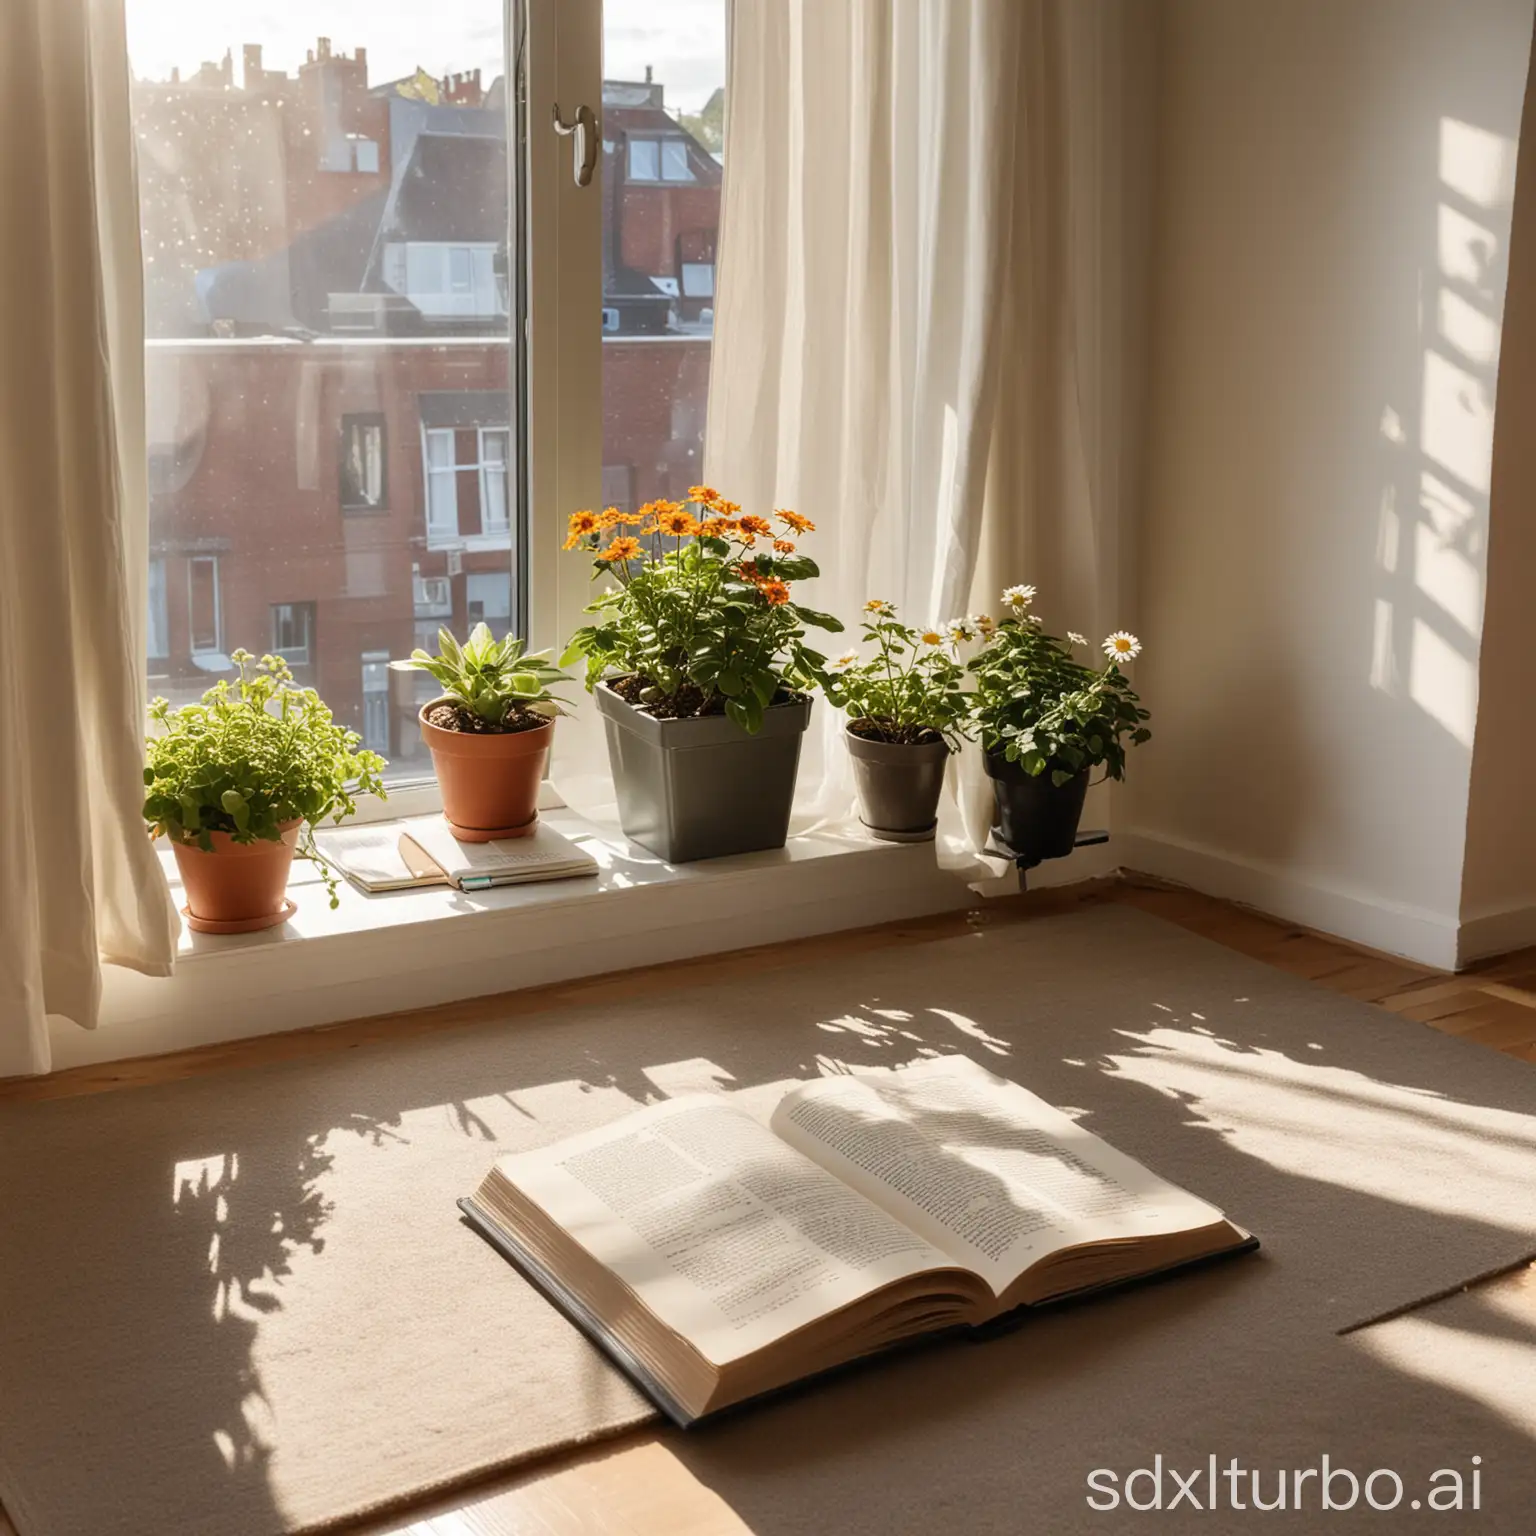 In the living room, there is a sofa, a carpet, coffee on the desk, along with an open book. By the windowsill, there is a flowerpot on the ground, with sunlight shining through the window onto it.